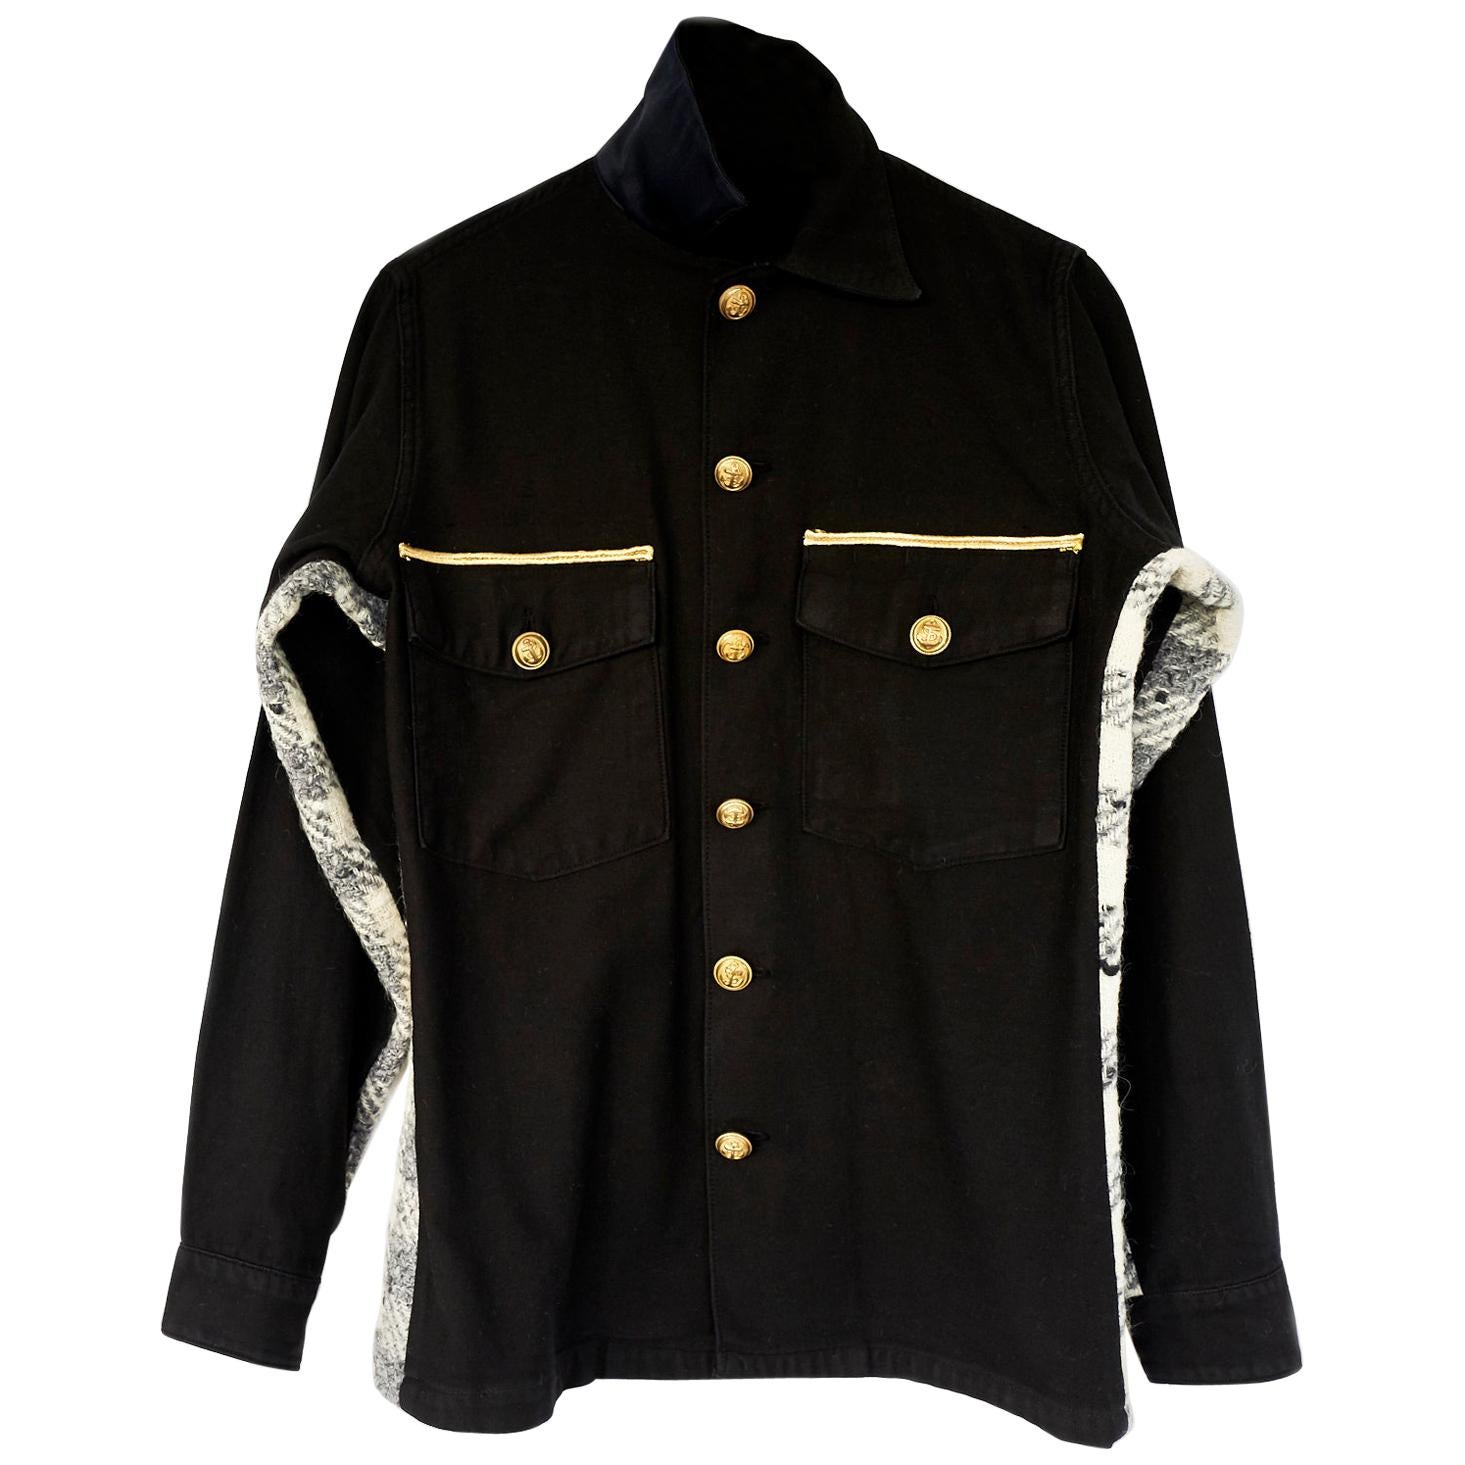 Embellished Black Military Jacket Flannel Gold Buttons Gold Braid J Dauphin